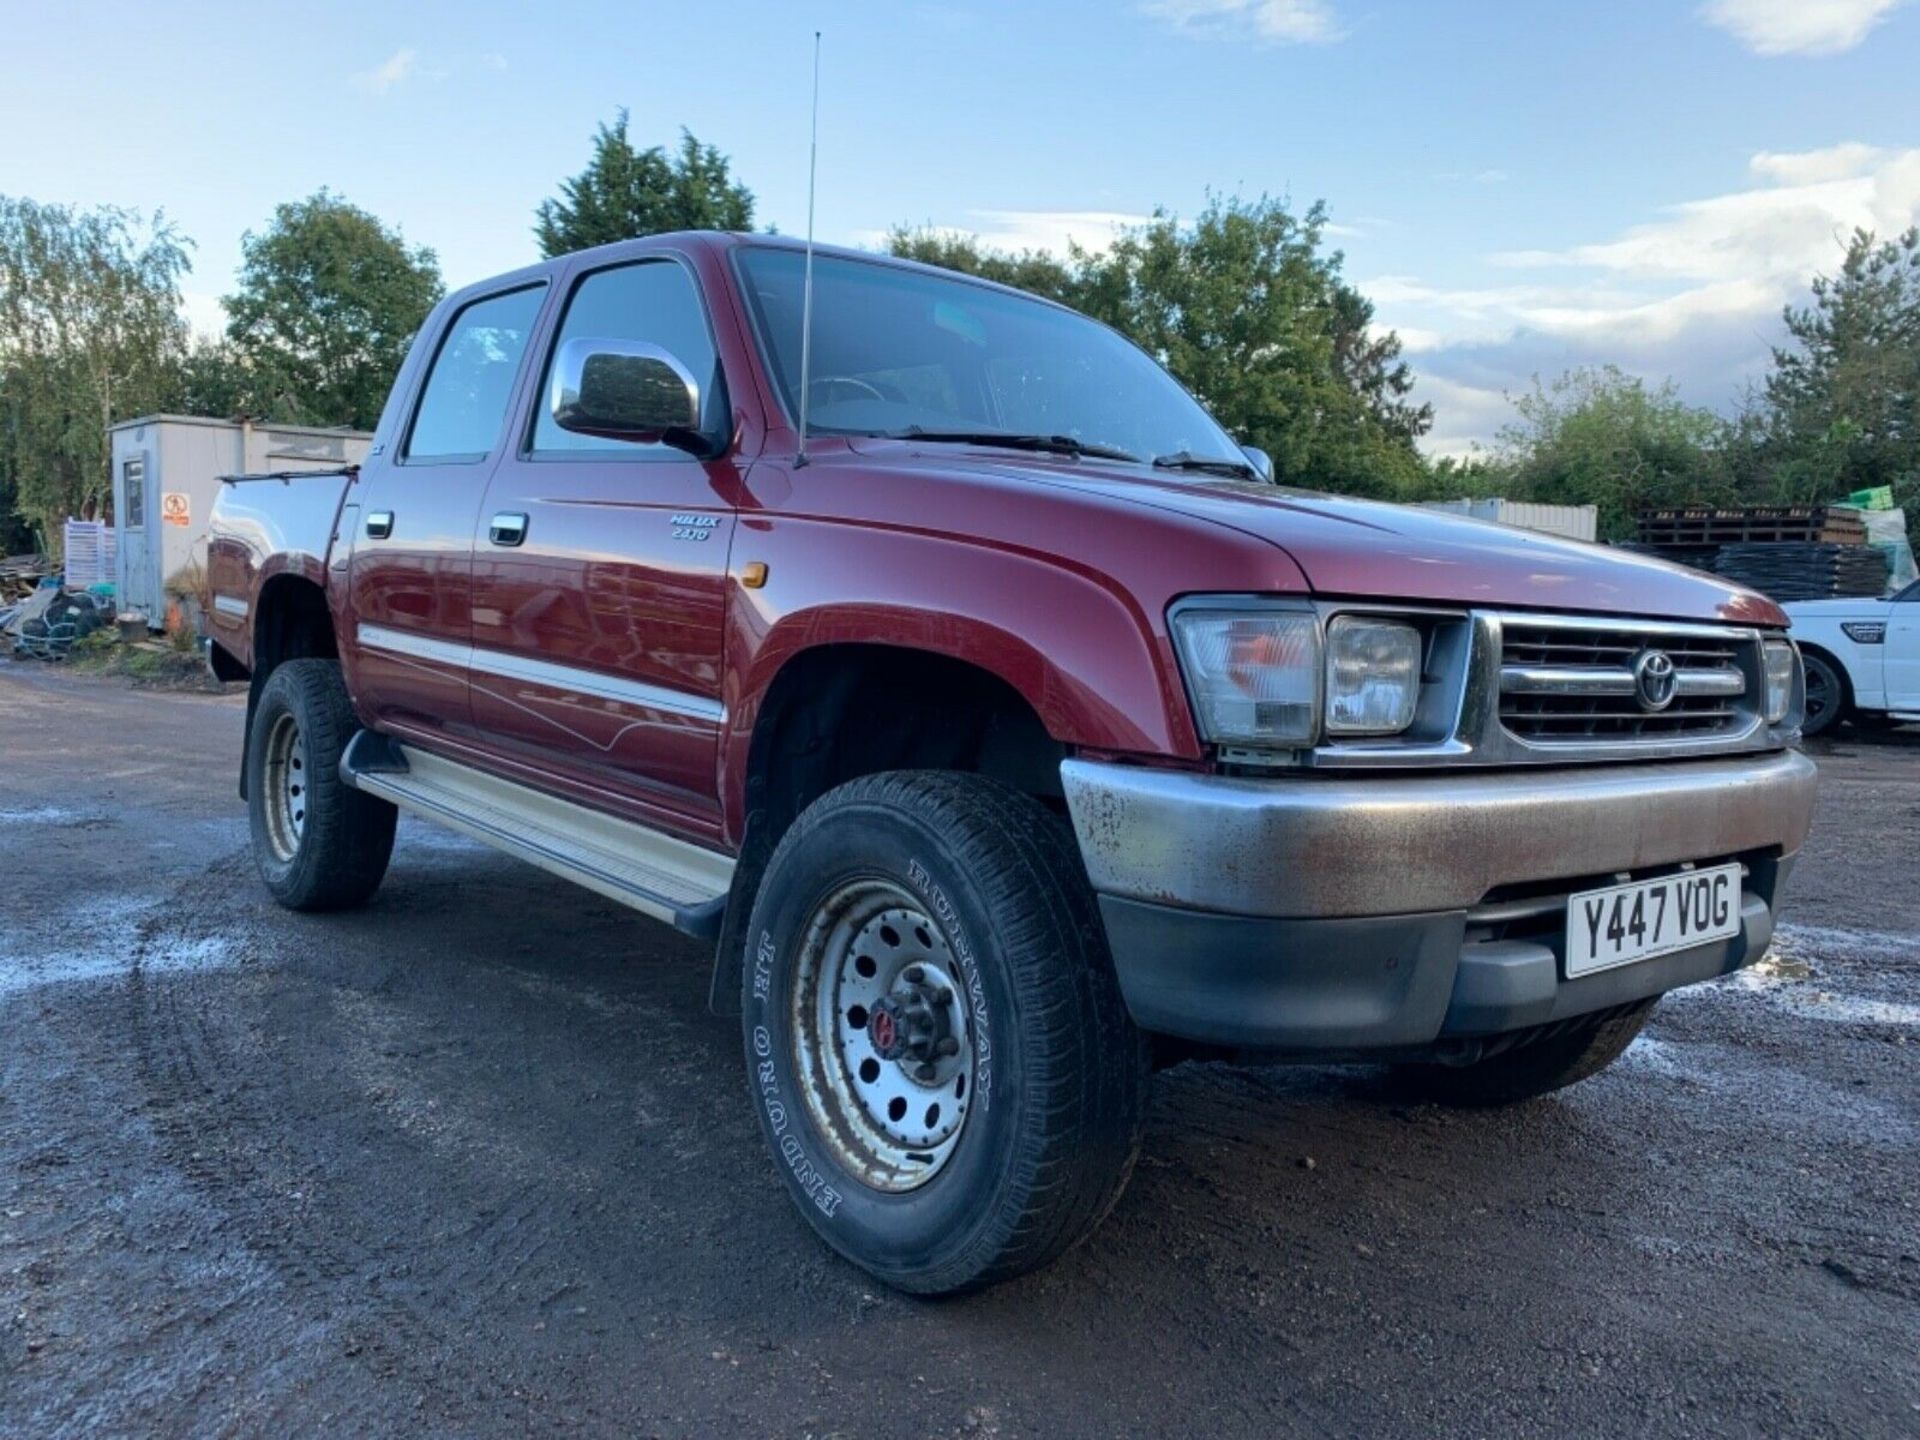 Toyota Hilux Pickup 4x4 - Image 4 of 12